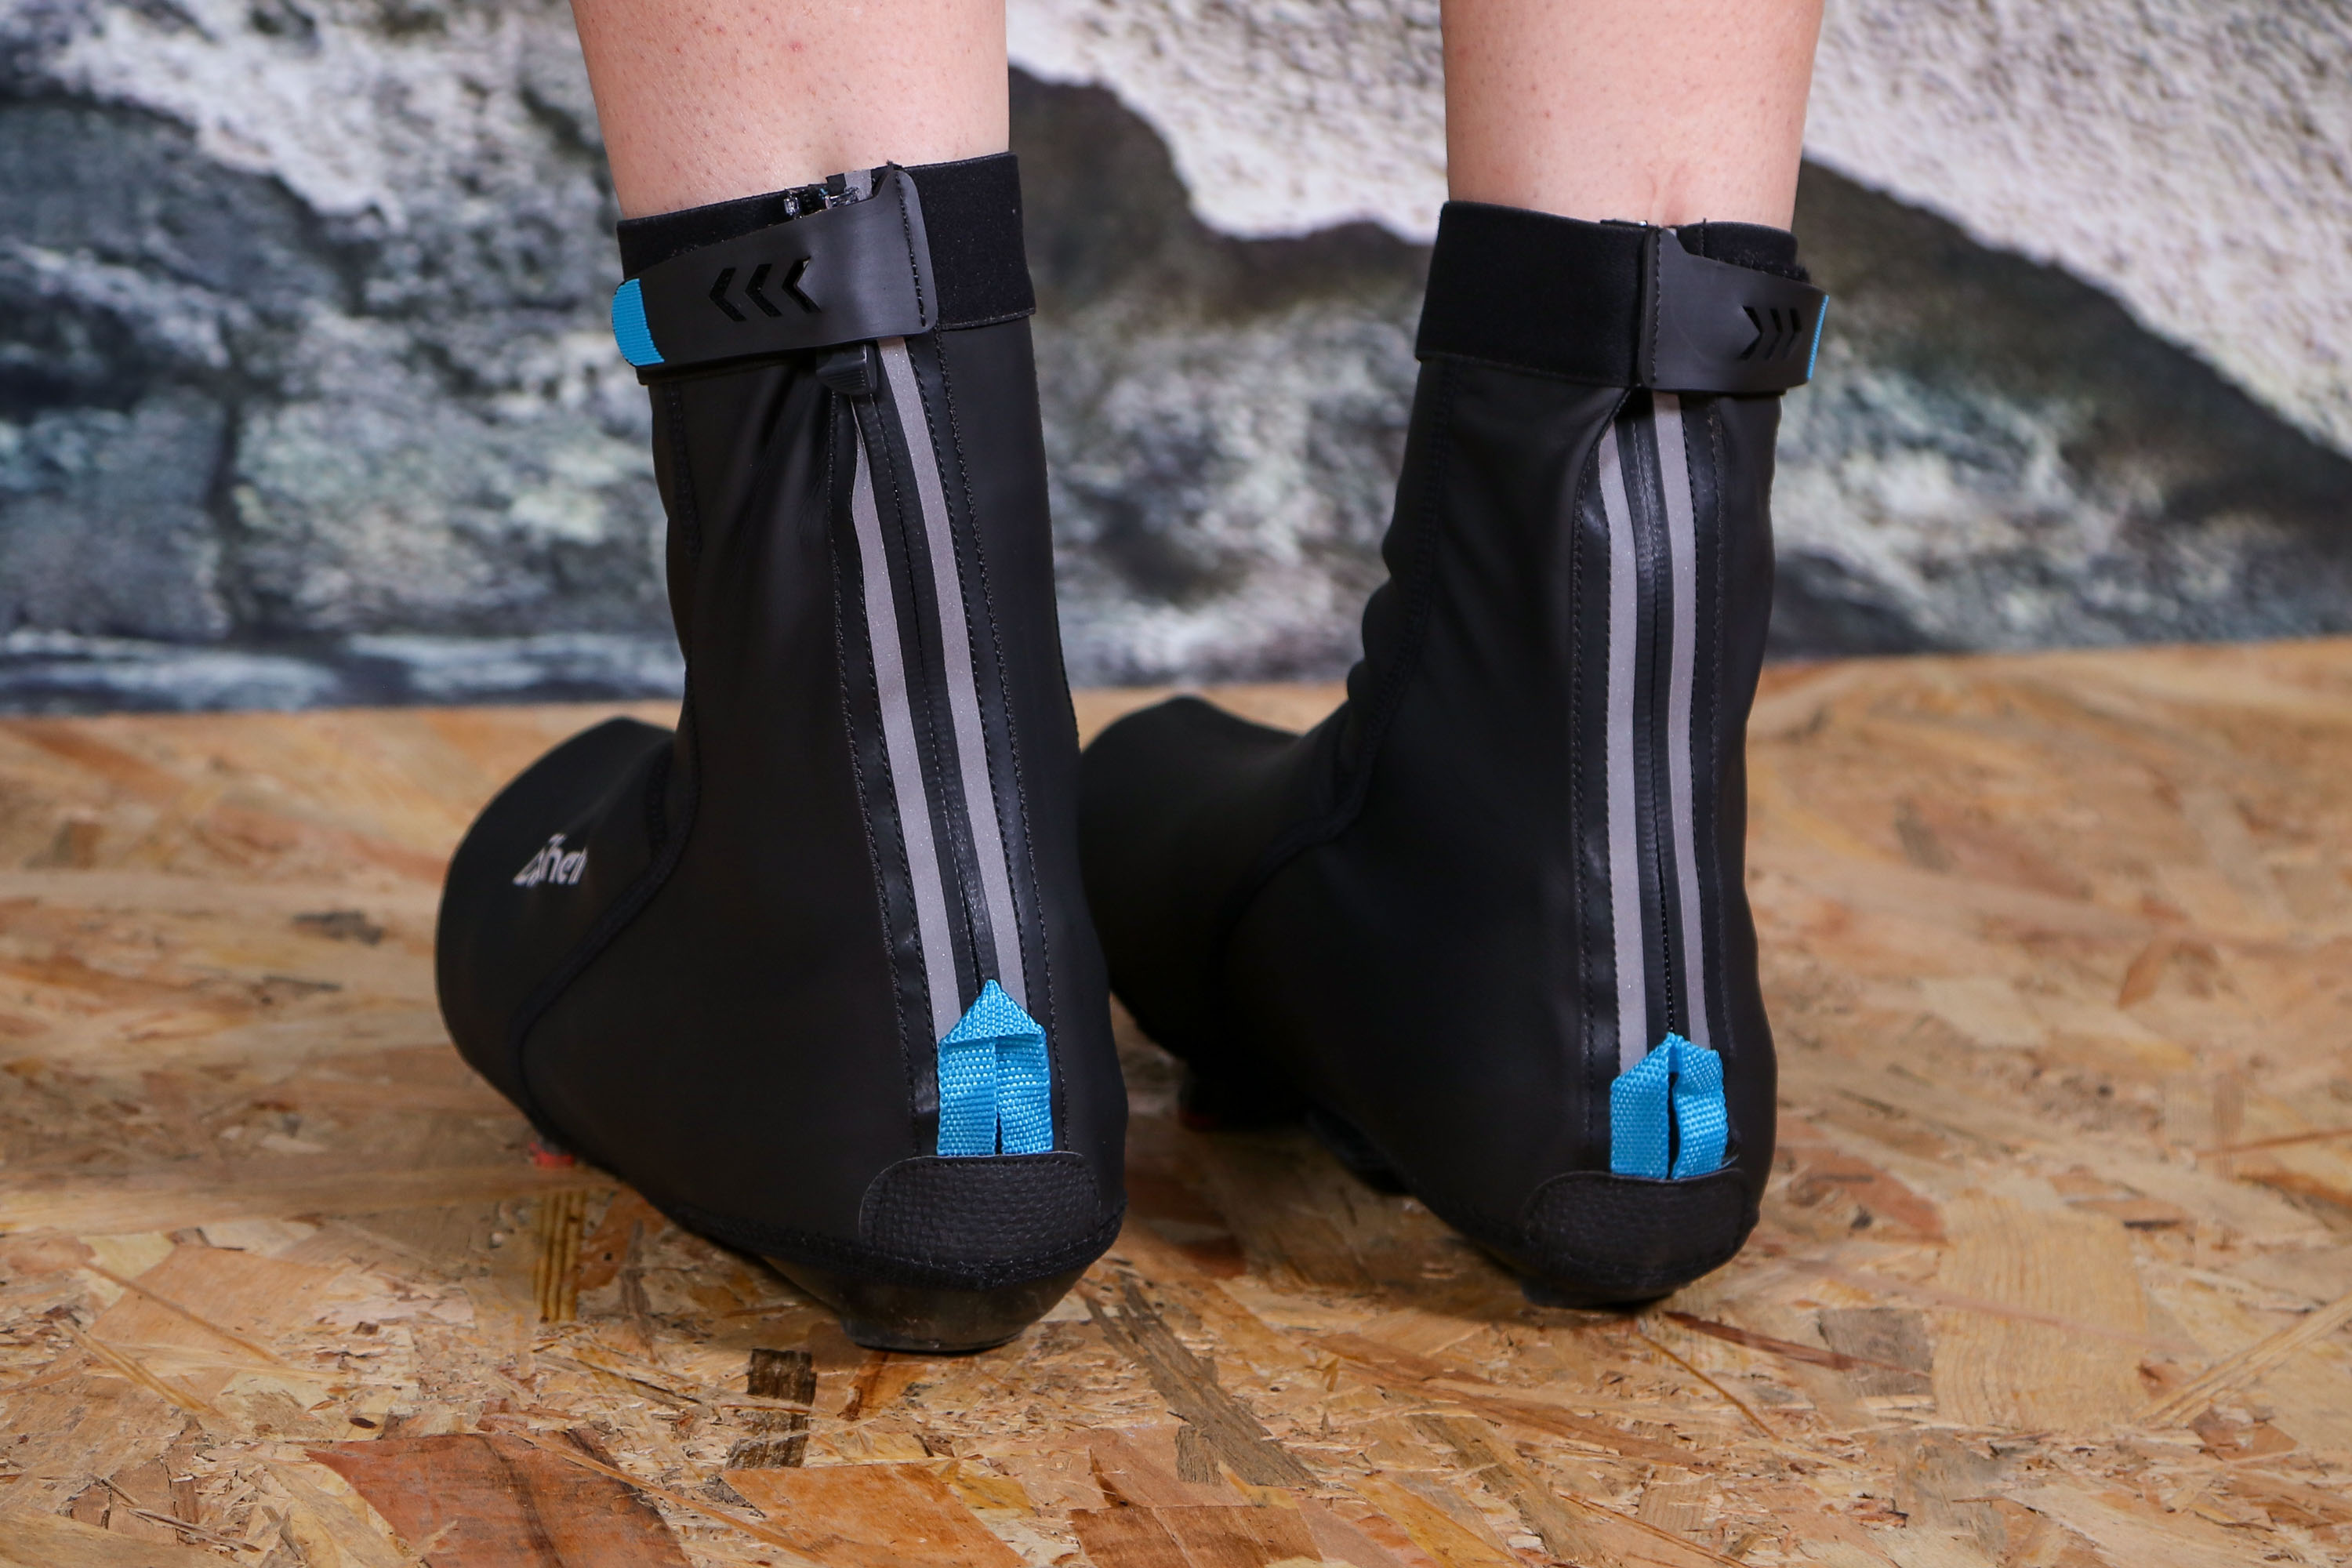 Review: DexShell Light Weight Overshoes | road.cc